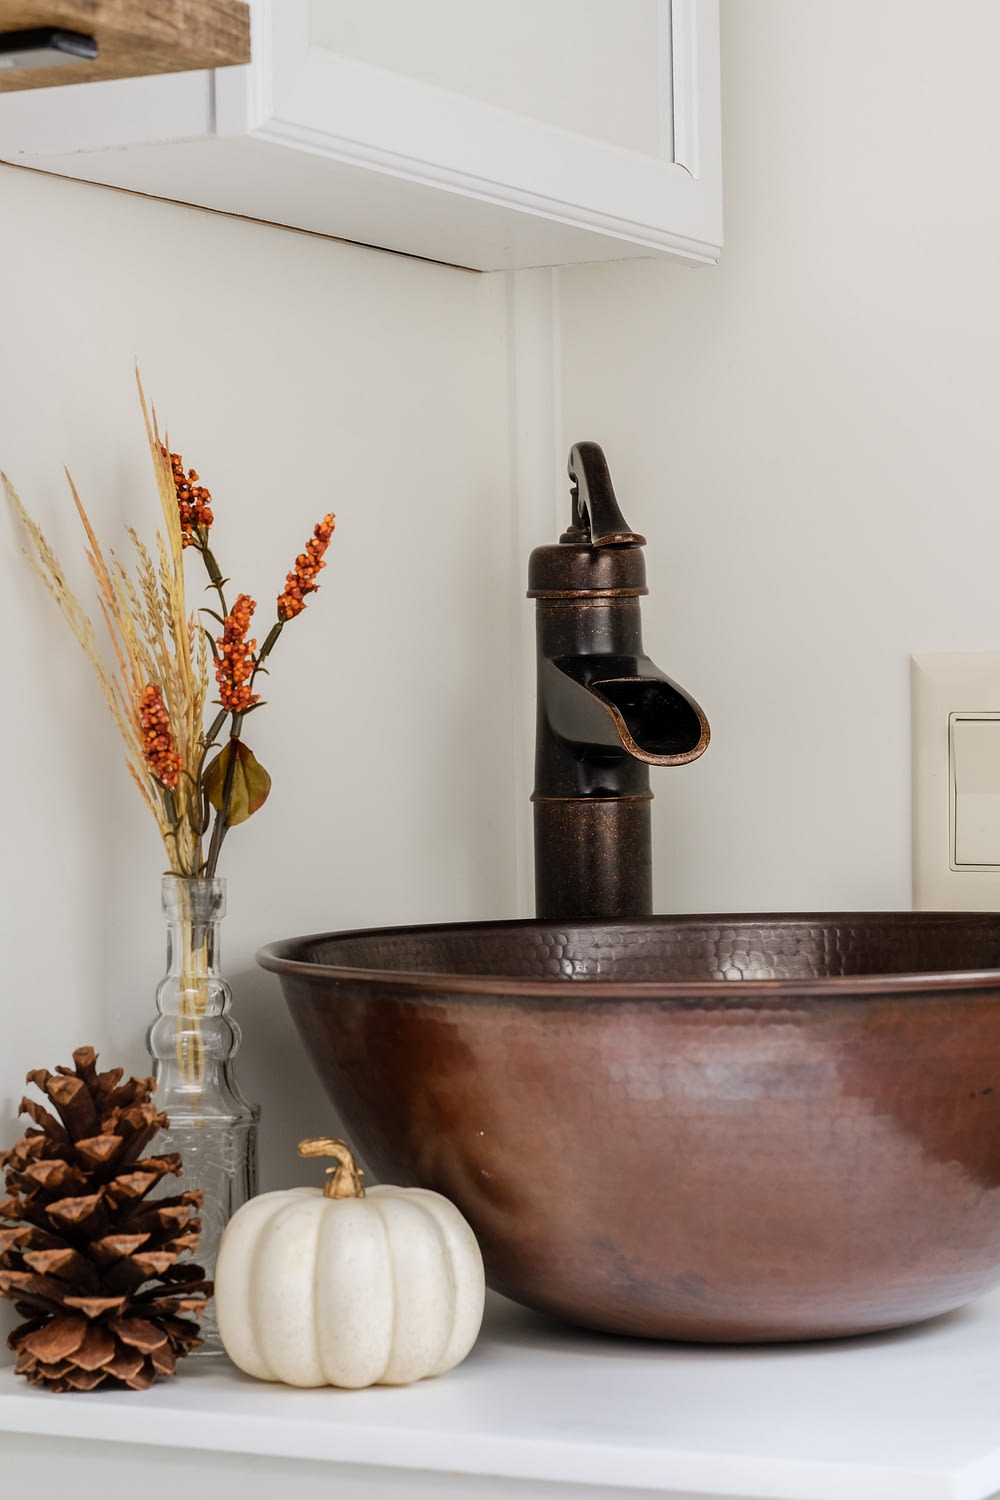 RV bathroom remodel decorated for fall with copper fixtures and mini pumpkins